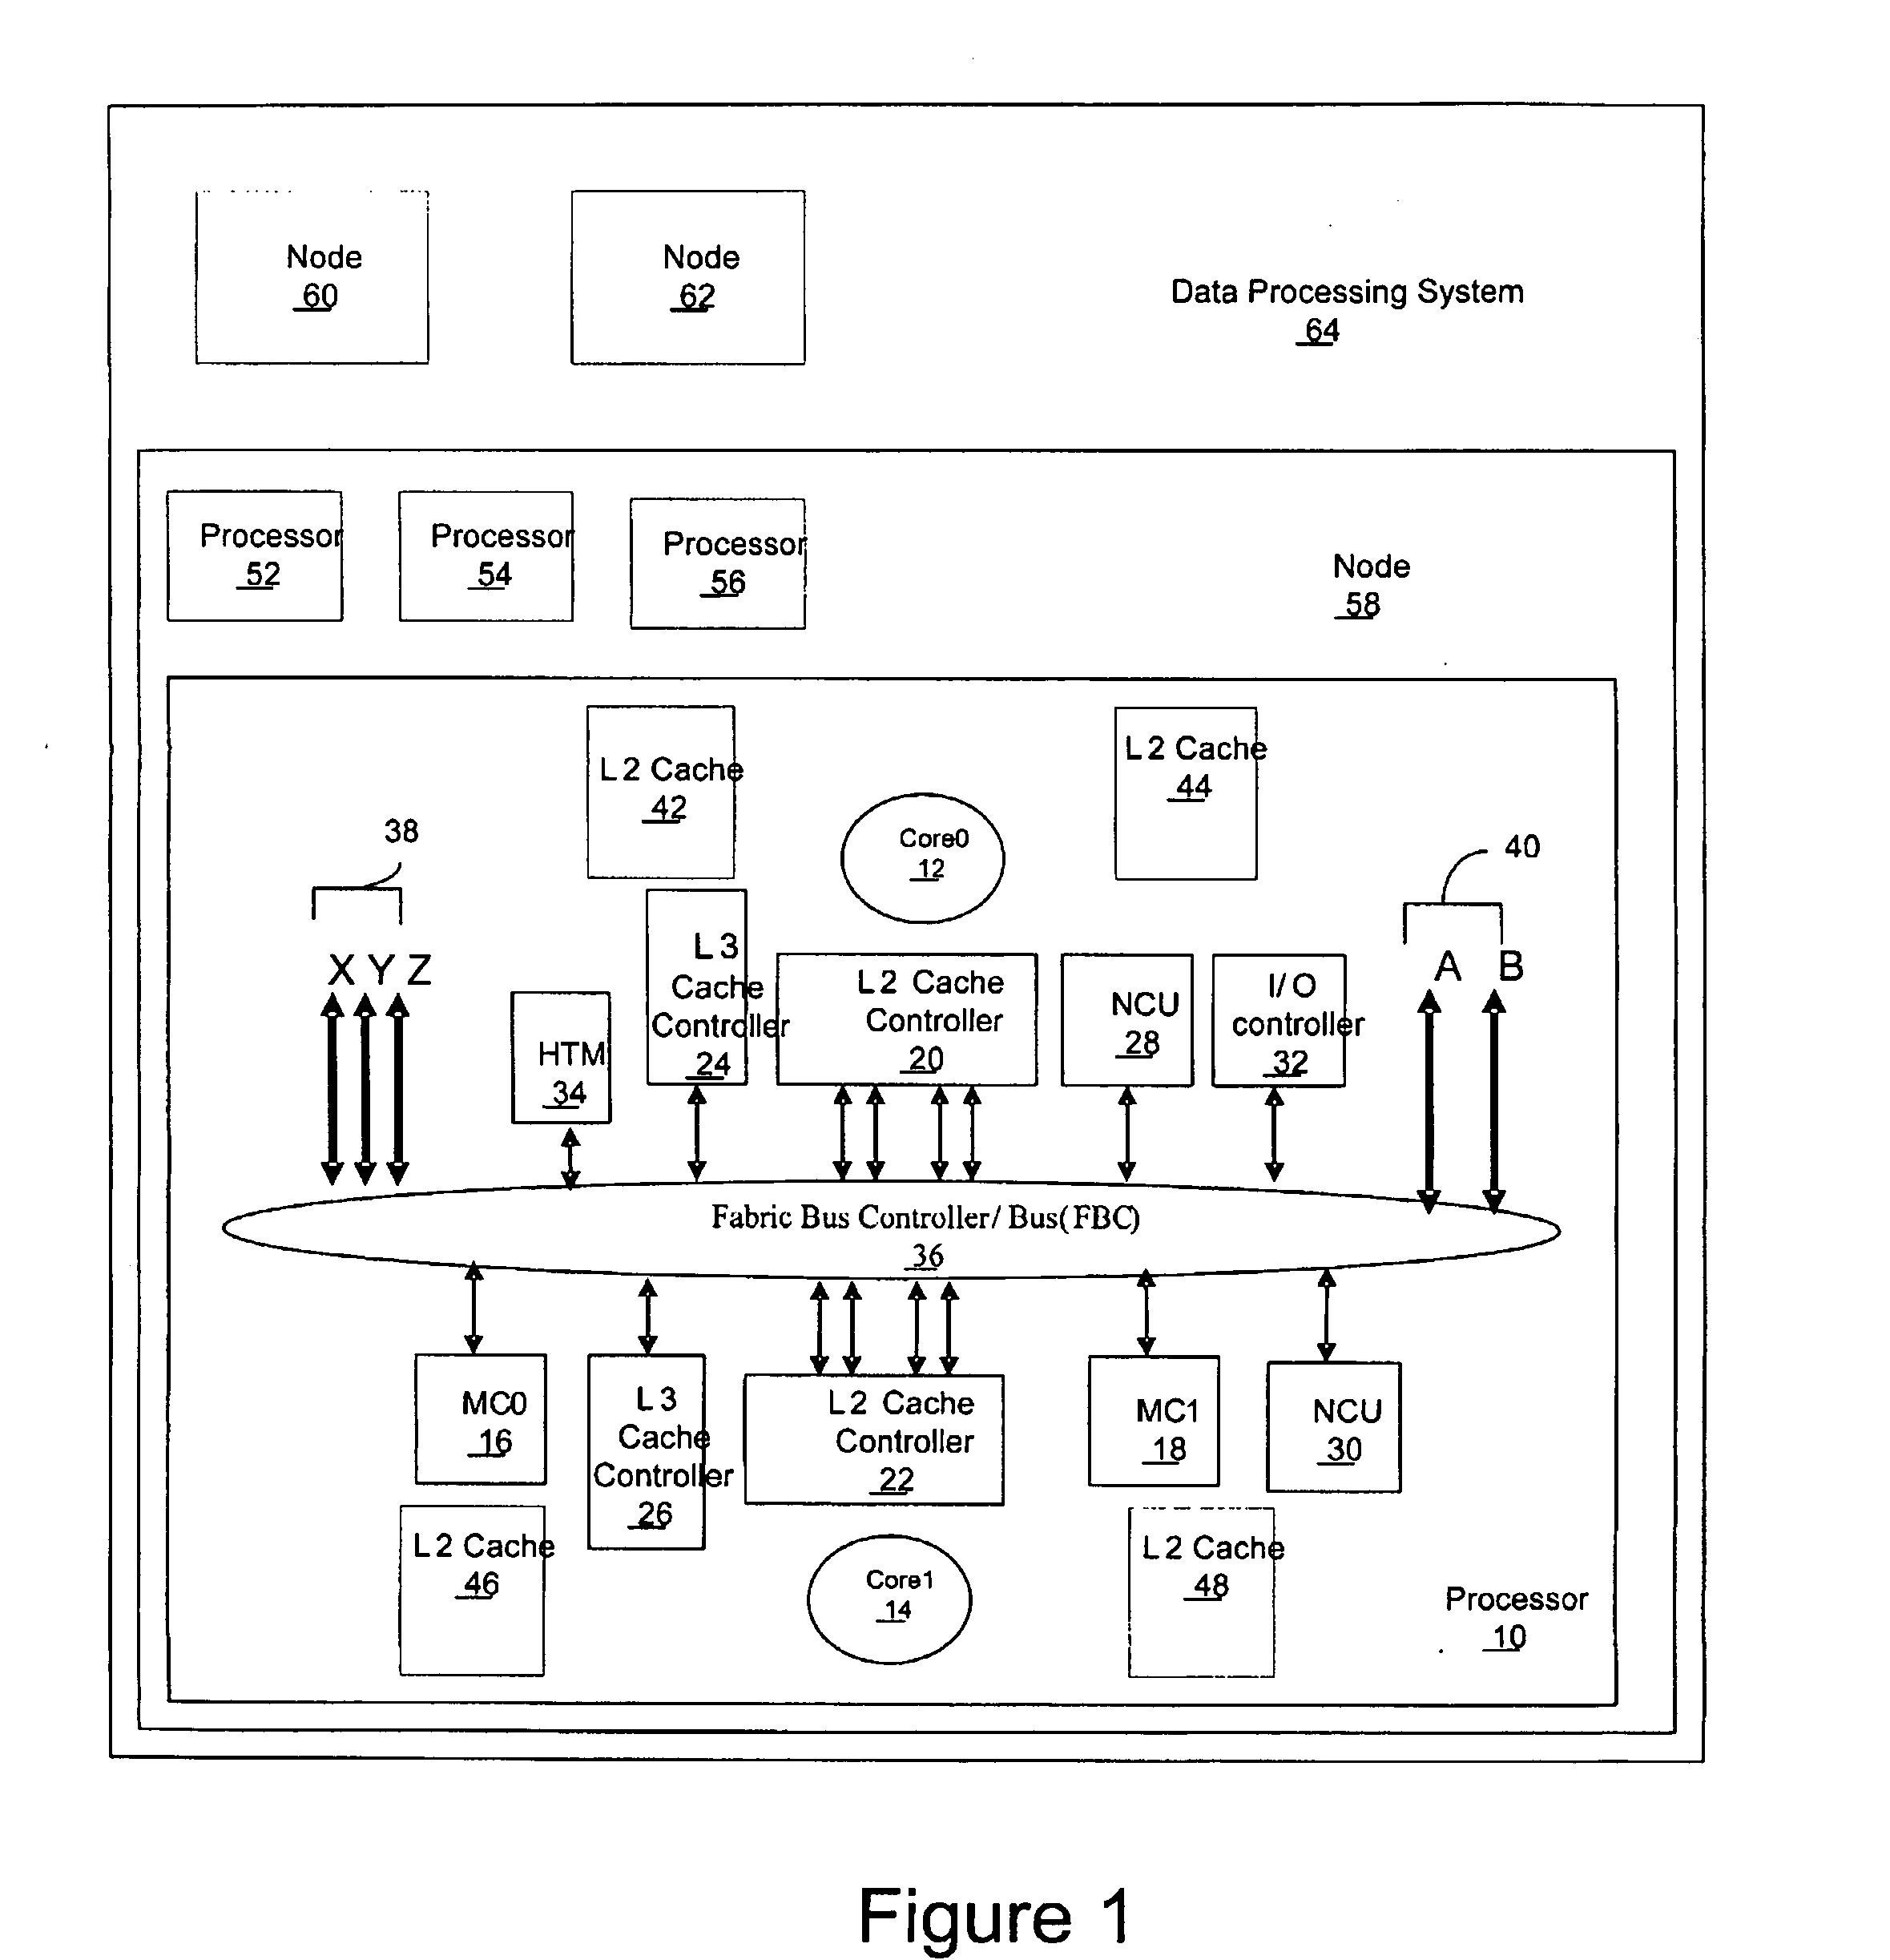 Method, apparatus, and computer program product in a processor for performing in-memory tracing using existing communication paths